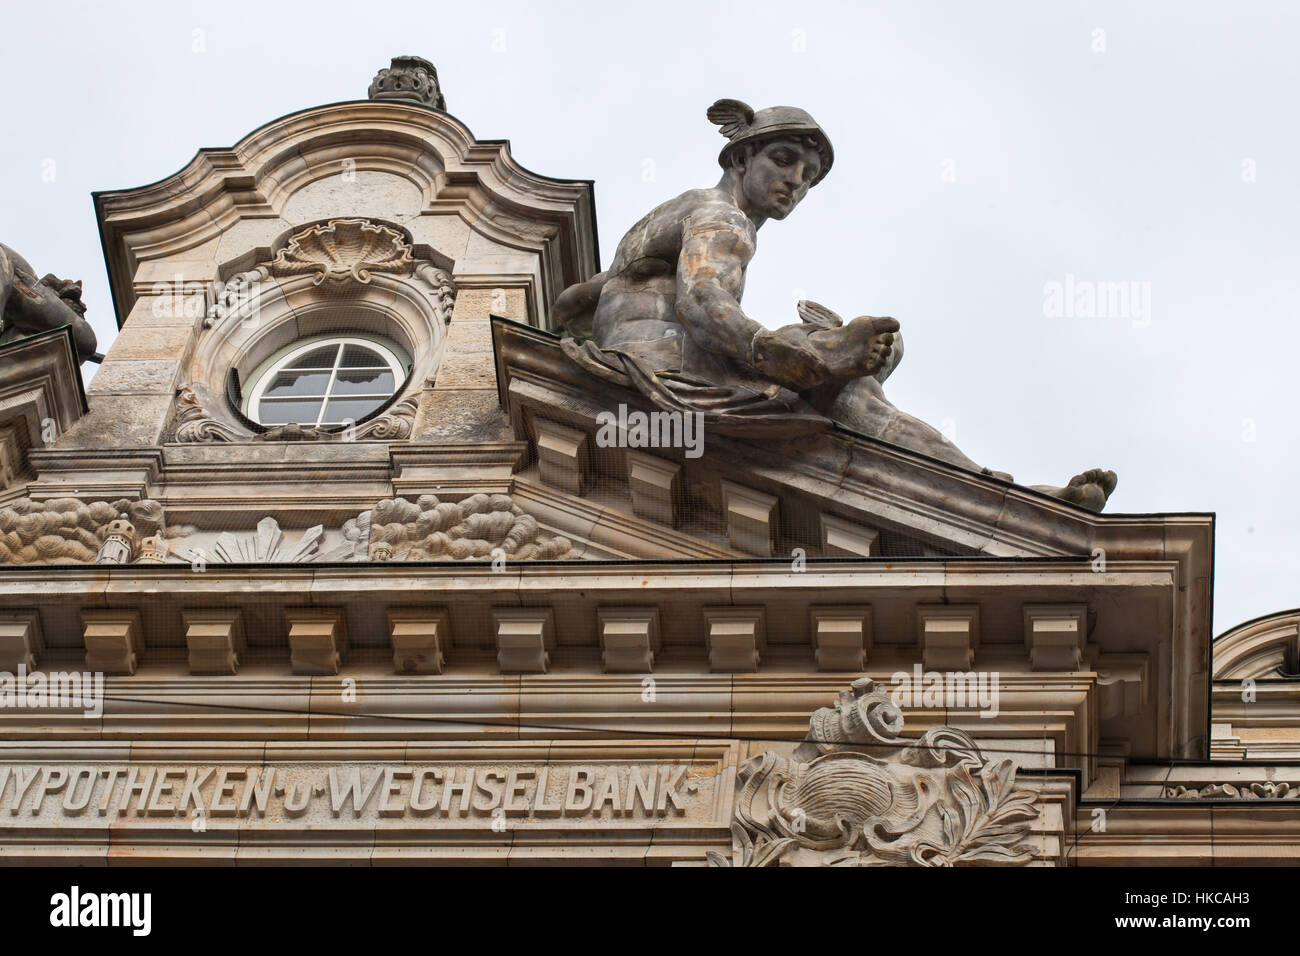 Mercury. Statue by German sculptor Hugo Kaufmann on the roof of the Neo-Baroque bank building in Munich, Bavaria, Germany. The building designed by German architect Emil Schmidt was built in 1895-1896 for the Bayerische Hypotheken- und Wechsel-Bank in Kardinal-Faulhaber-Straße 10. Stock Photo